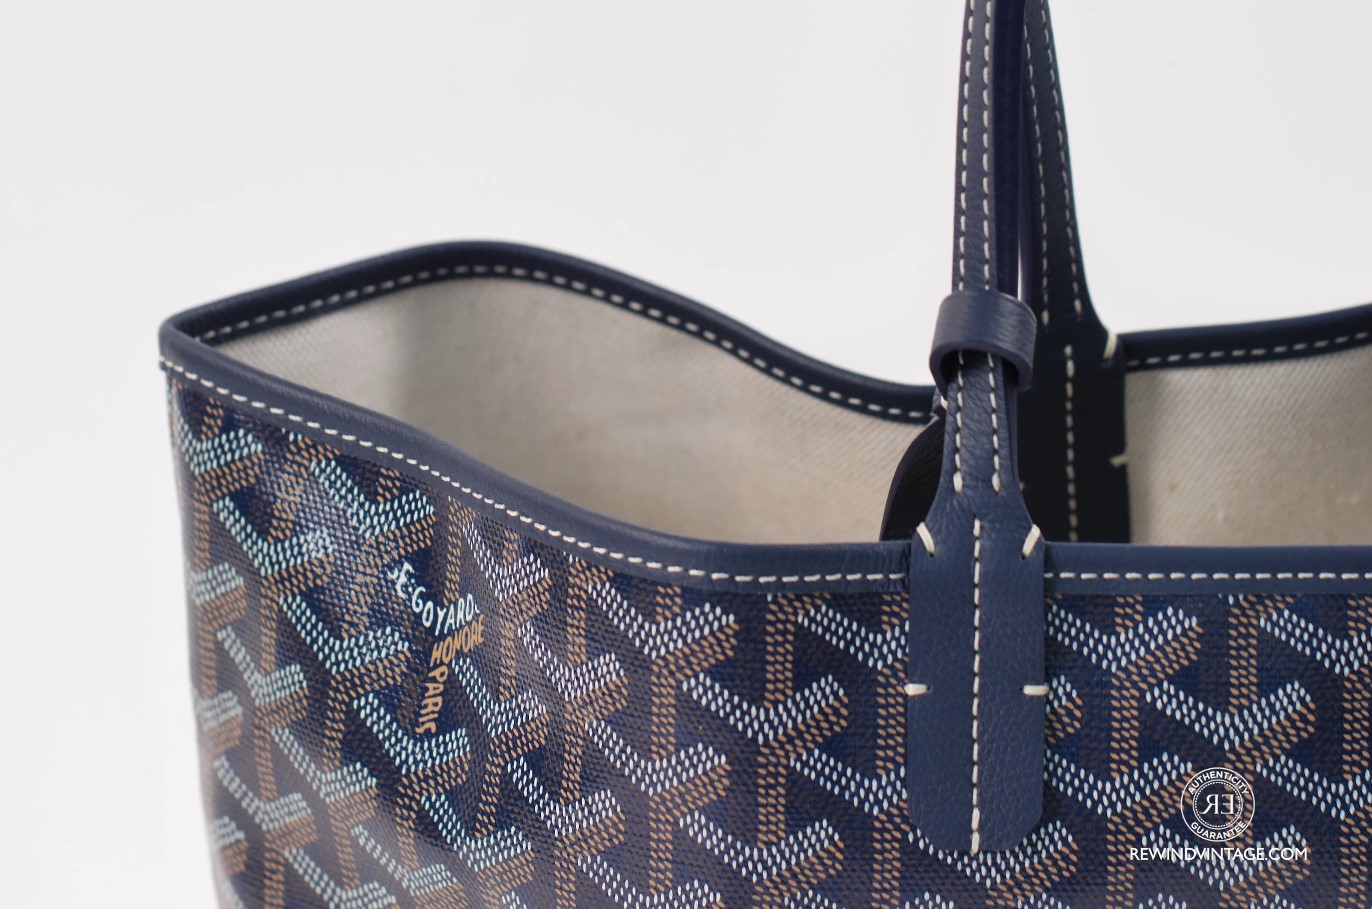 PERFECTLY IMPERFECT: A GUIDE TO GOYARD ST. LOUIS TOTE BAG